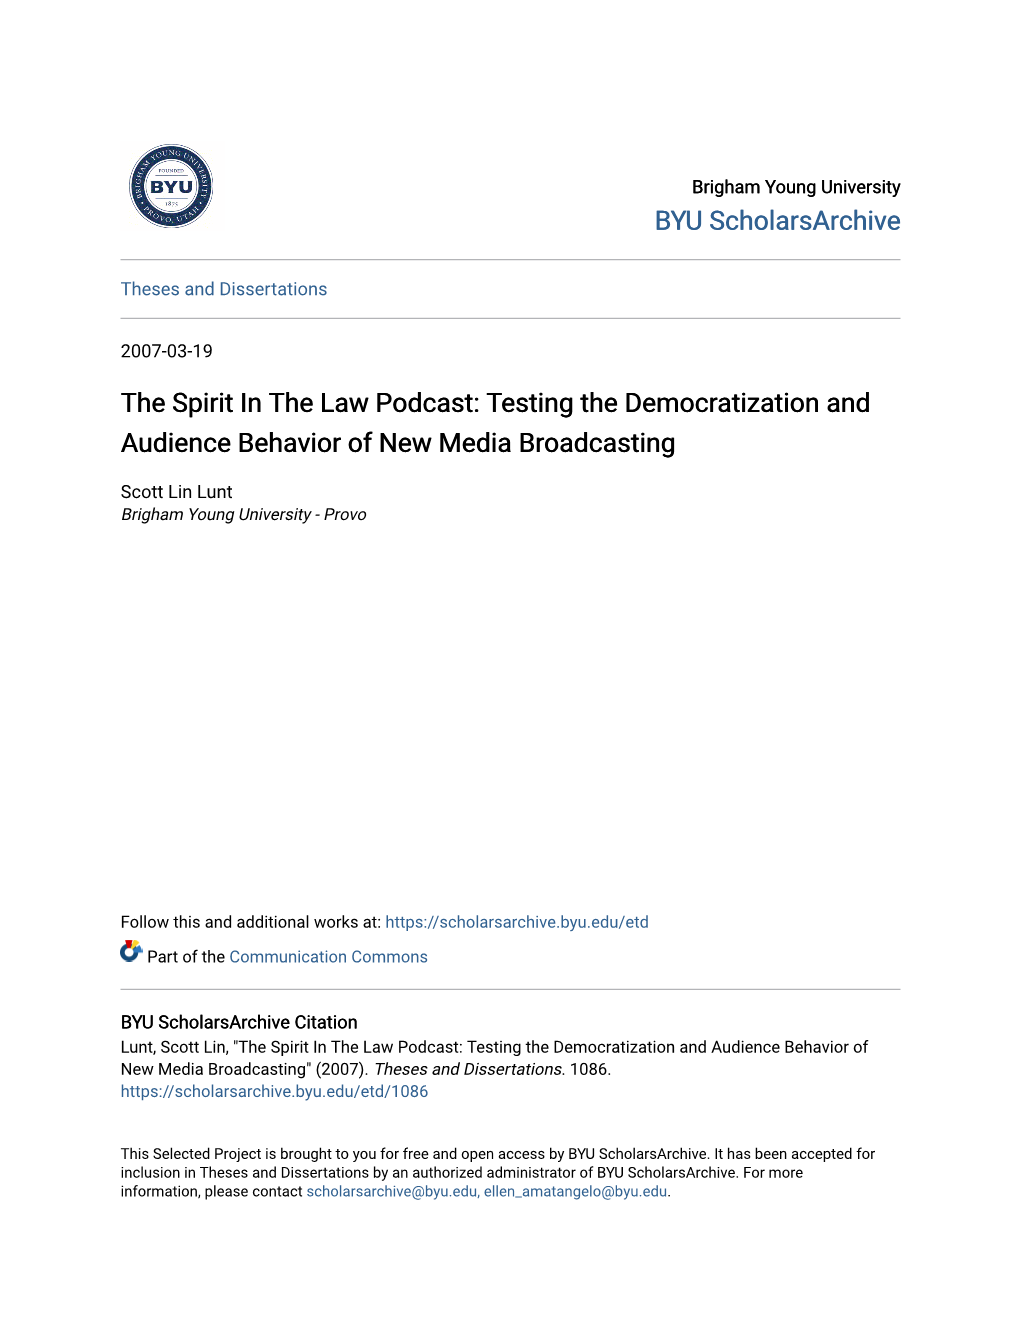 The Spirit in the Law Podcast: Testing the Democratization and Audience Behavior of New Media Broadcasting